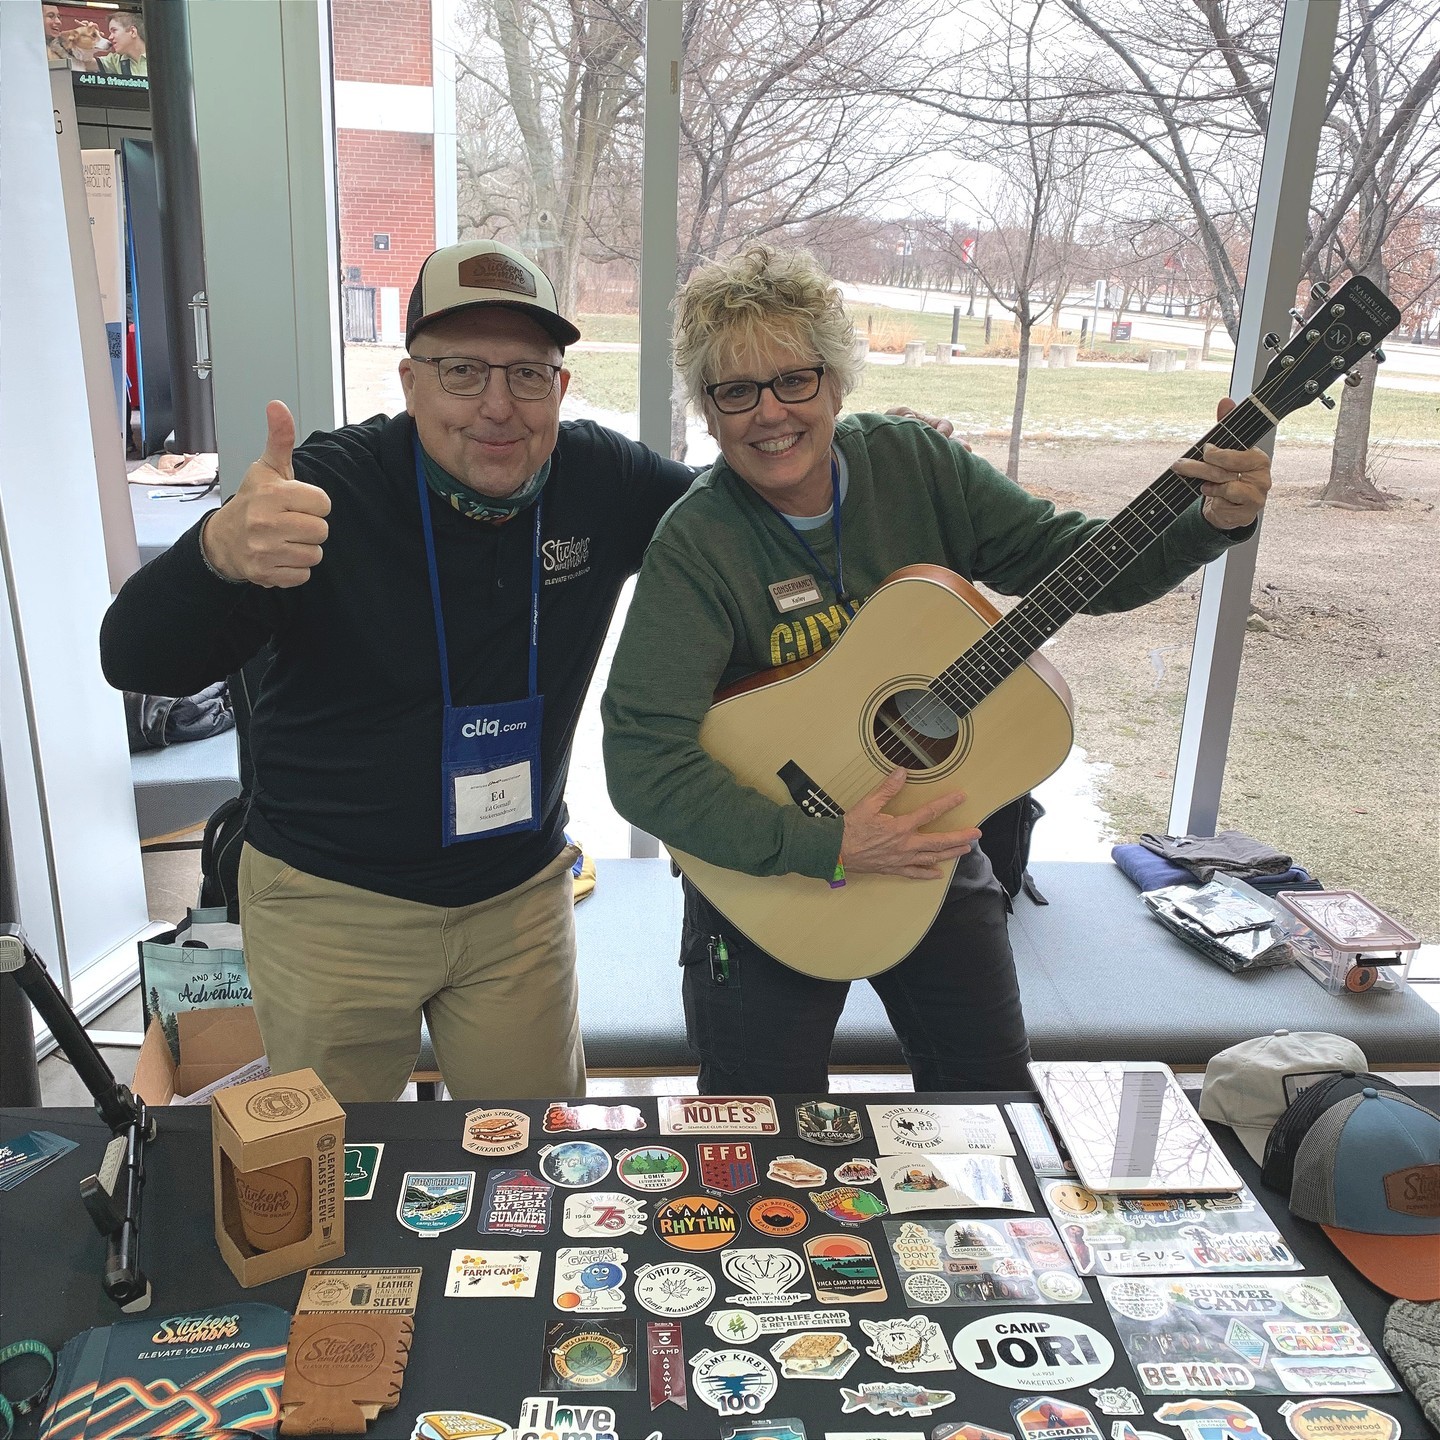 Congratulations! to Kelly from Northfield, Ohio on winning the guitar giveaway at the ACA Ohio Conference! Check out our website and see all the amazing products we have to offer.
https://loom.ly/TyGkFkA
 #amazingproducts #ohio #congratulation #giveaway #aca #conference #winning #win #camplife